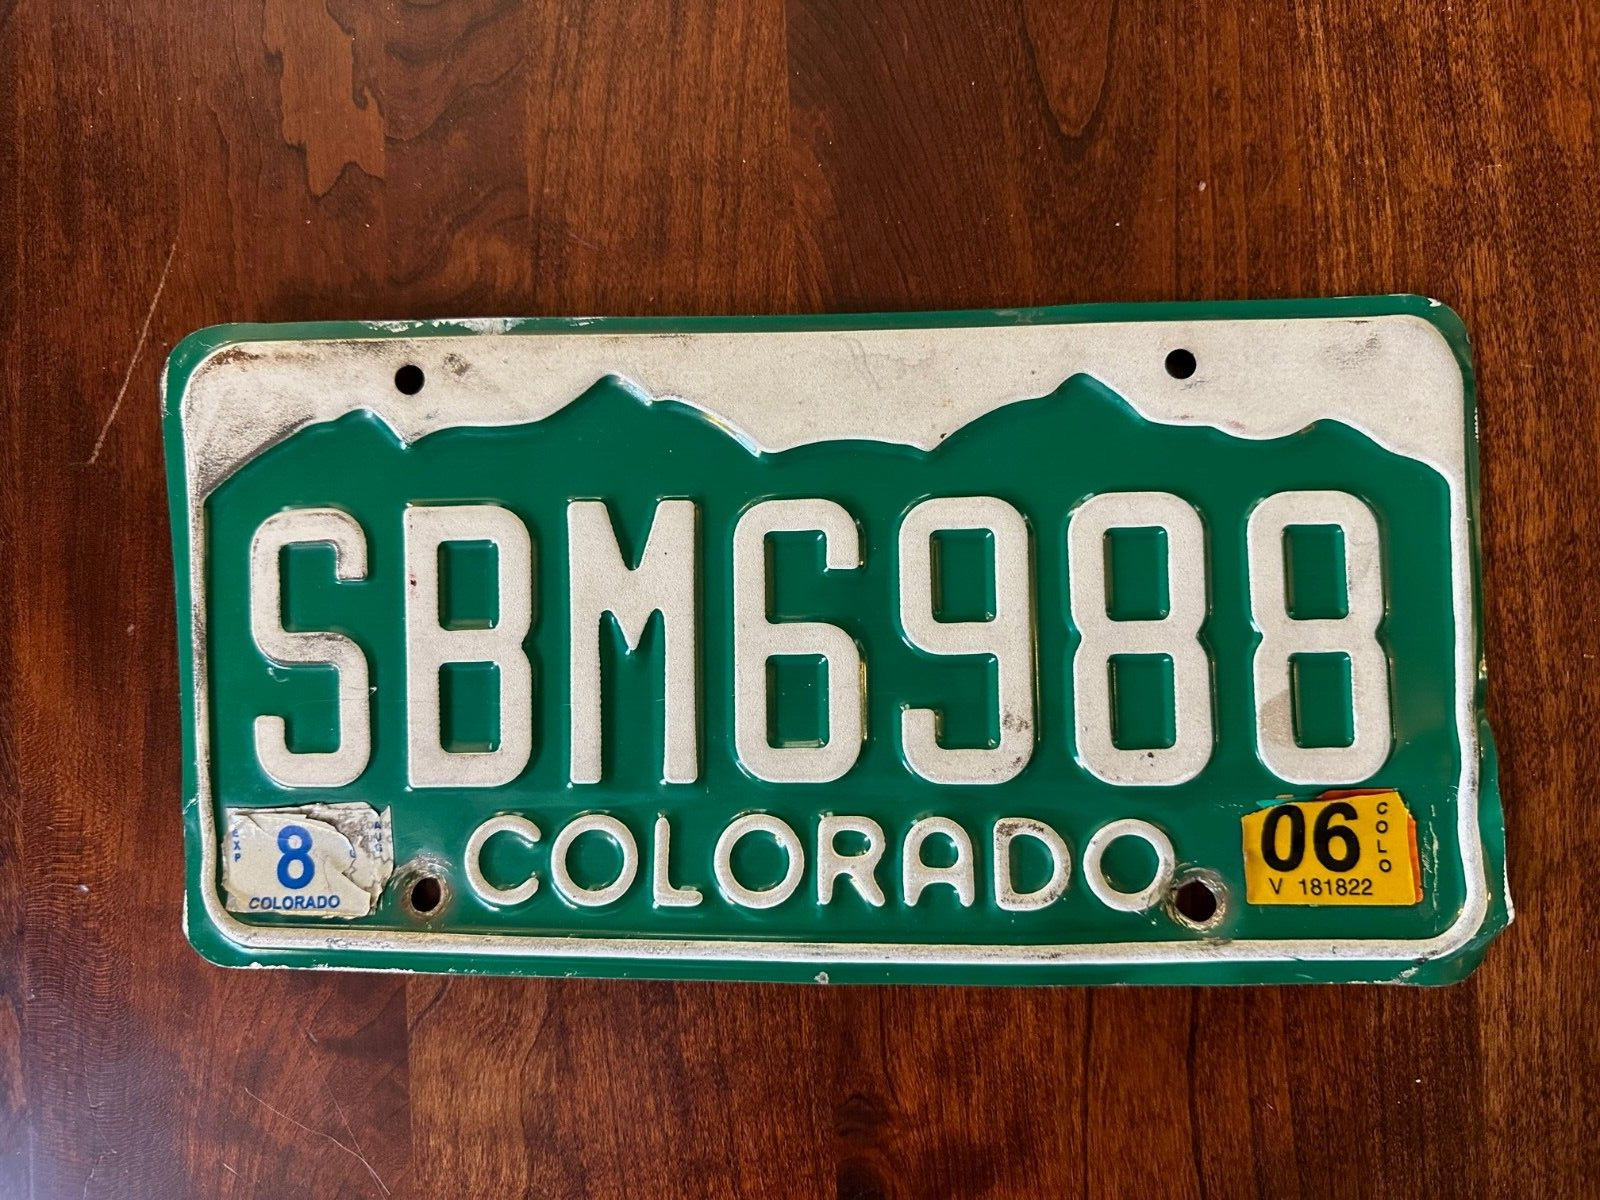 2006 Colorado License Plate SBM6988 Authentic Metal USA Rocky Mountains August